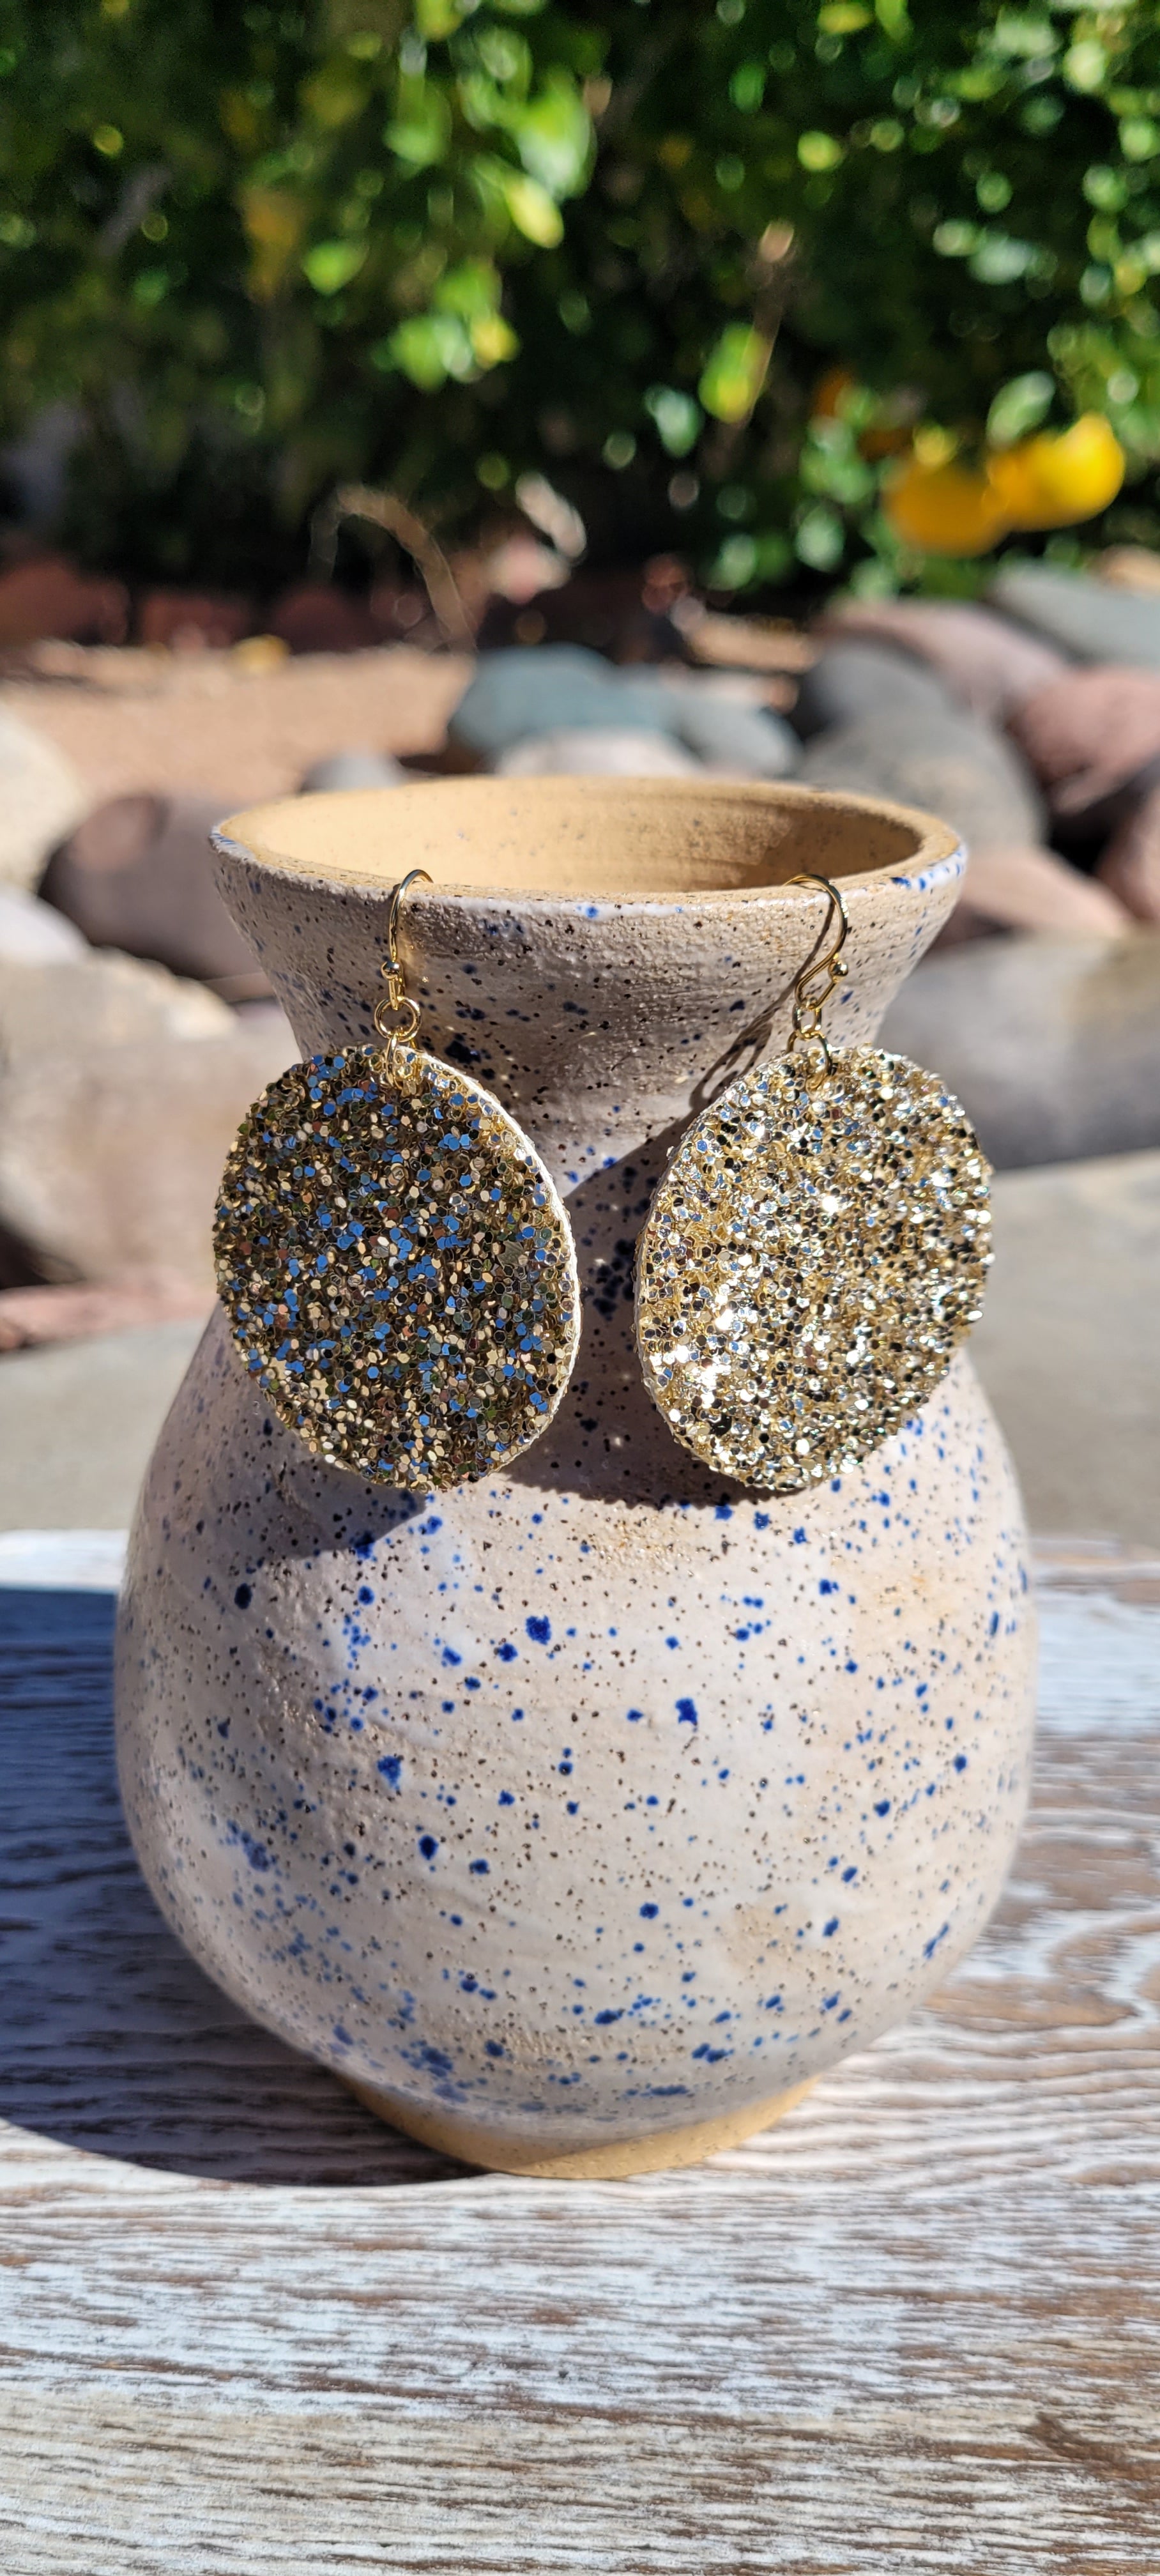 Circle shape Gold glitter and sequins Brushed gold fish hook dangle earrings Rubber earring back Diameter 1.5” Whether you want to be on the wild side or classy this earring set it will add a fun touch to your outfit